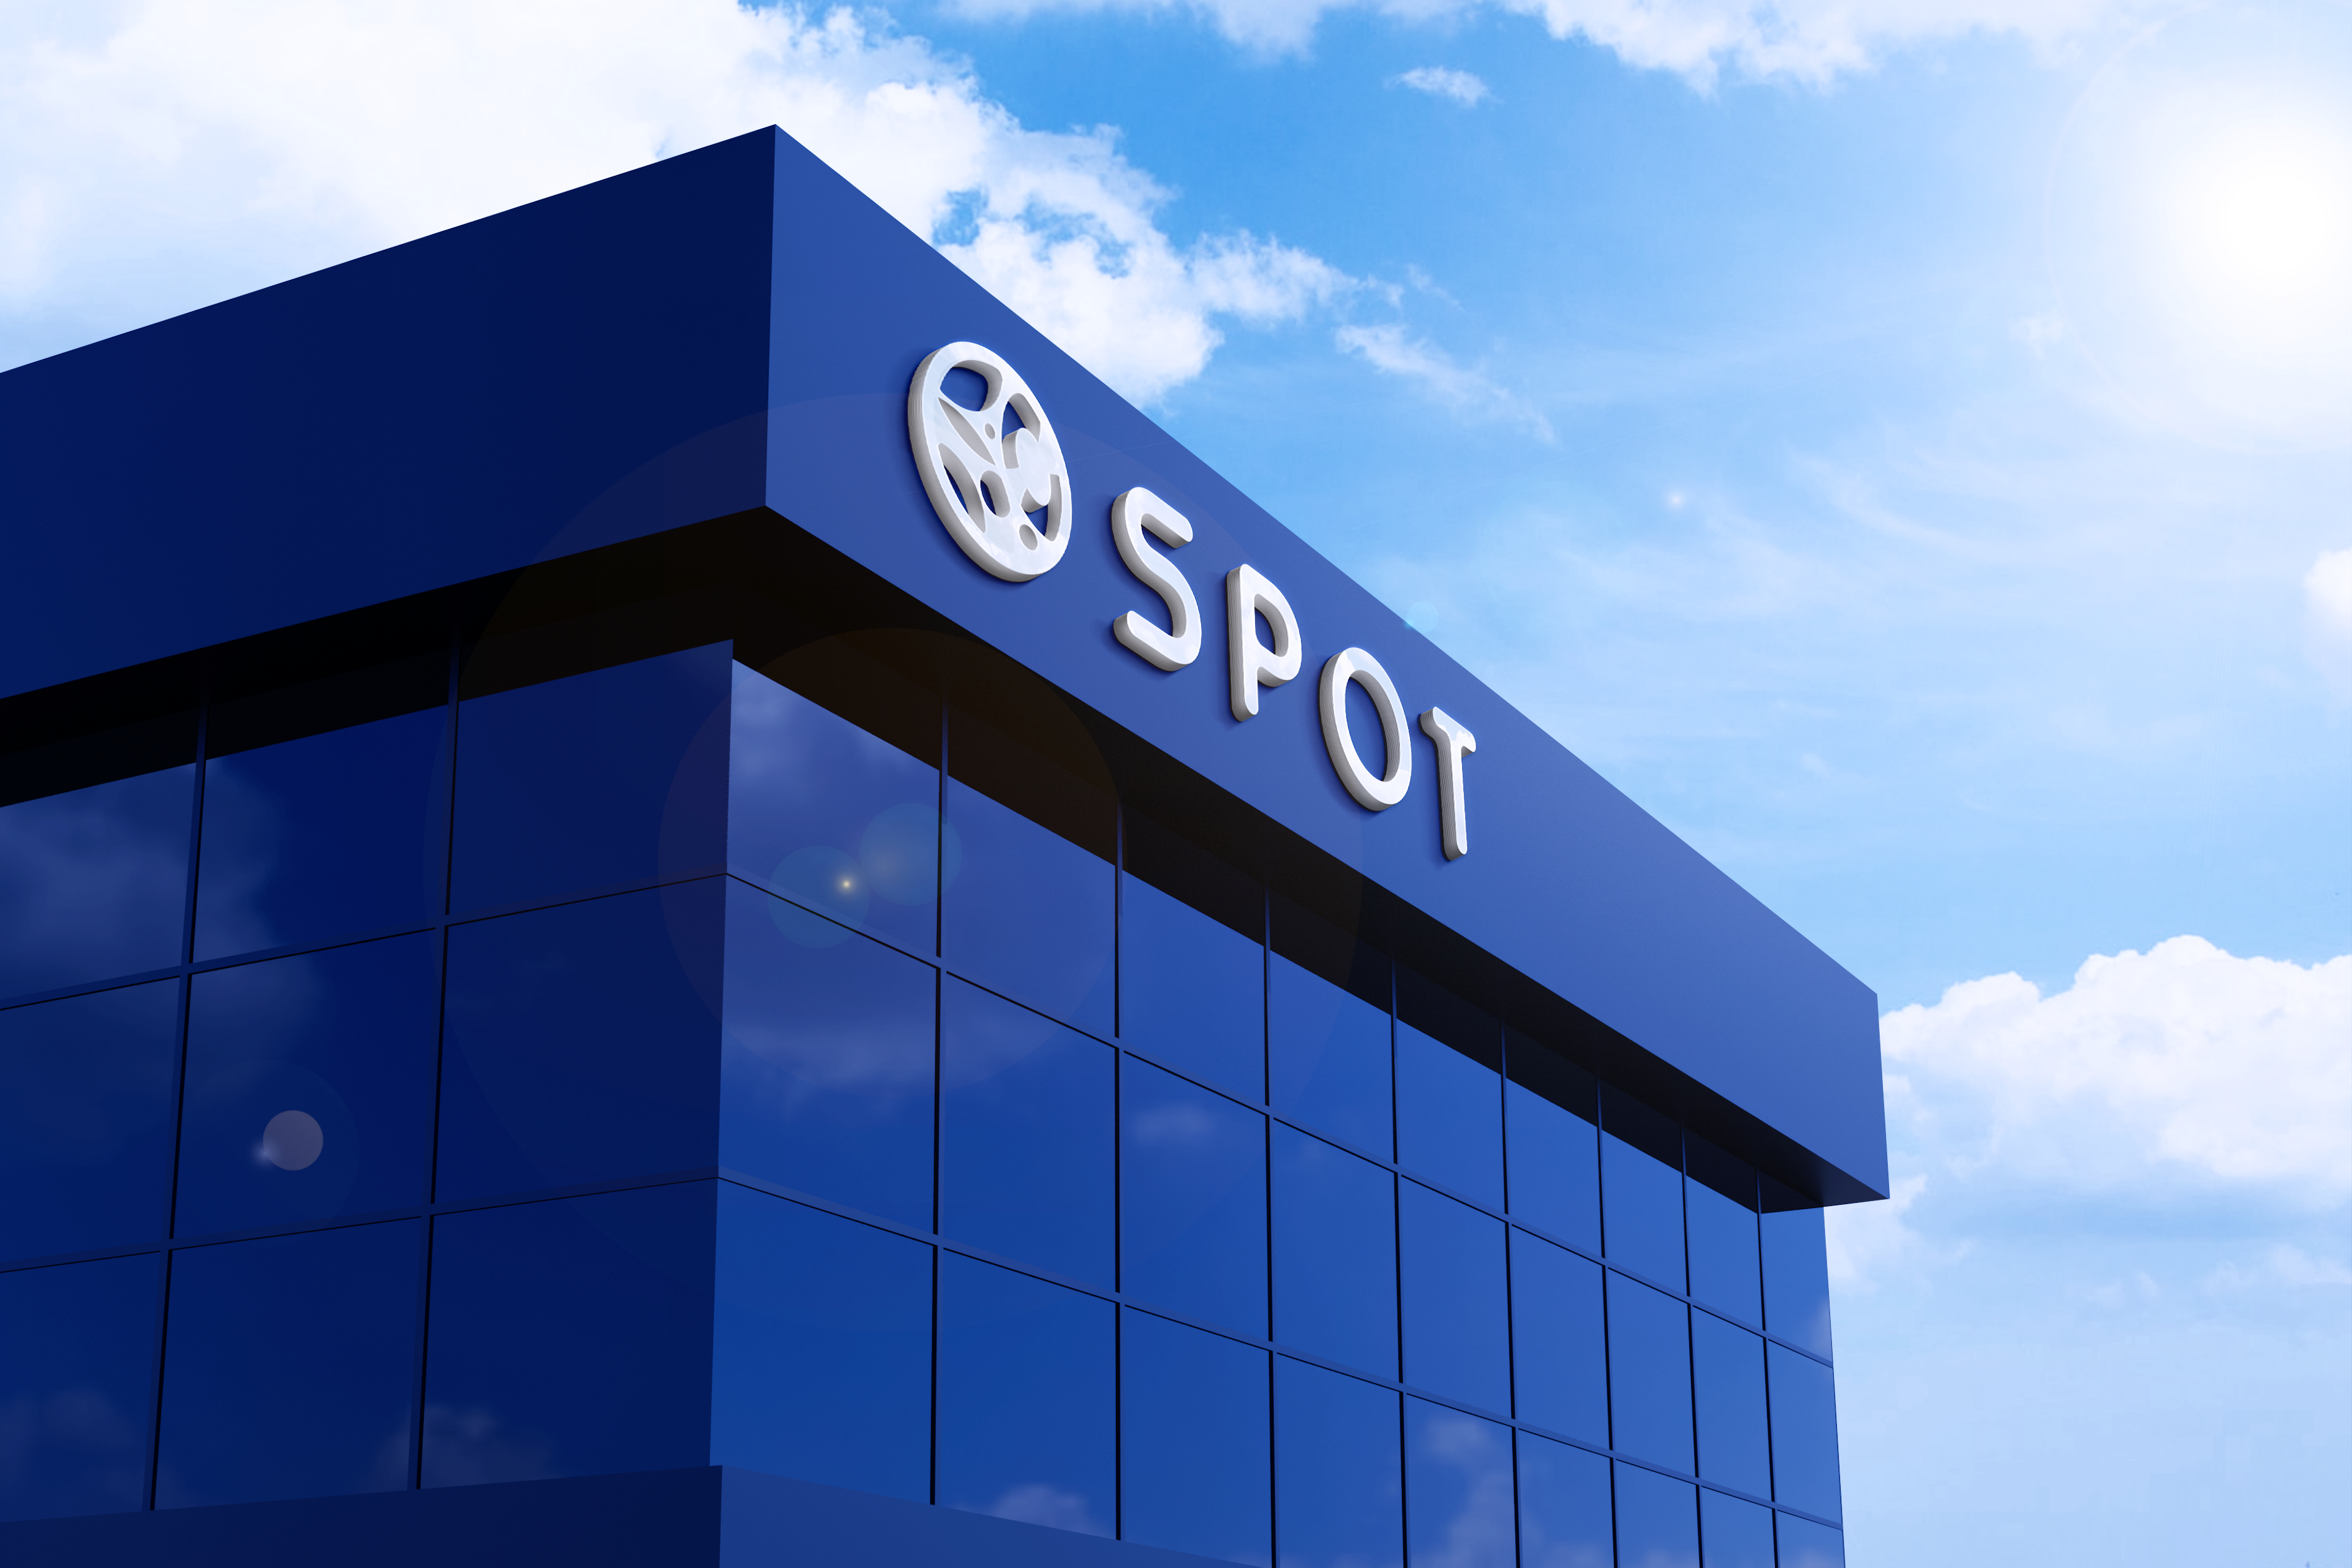 Building with spot logo